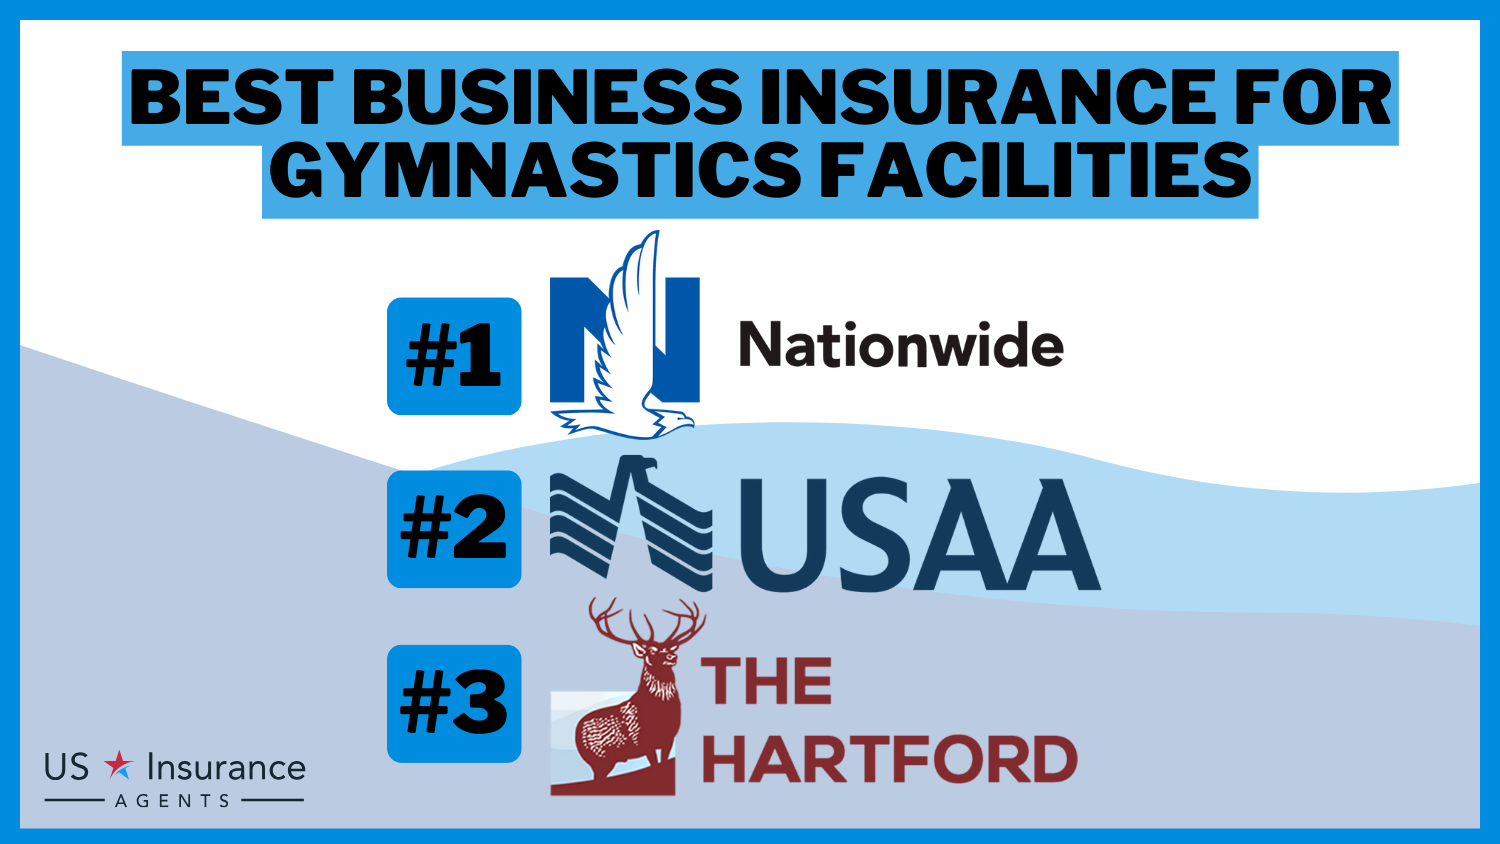 Best Business Insurance for Gymnastics Facilities: Nationwide, USAA and The Hartford.